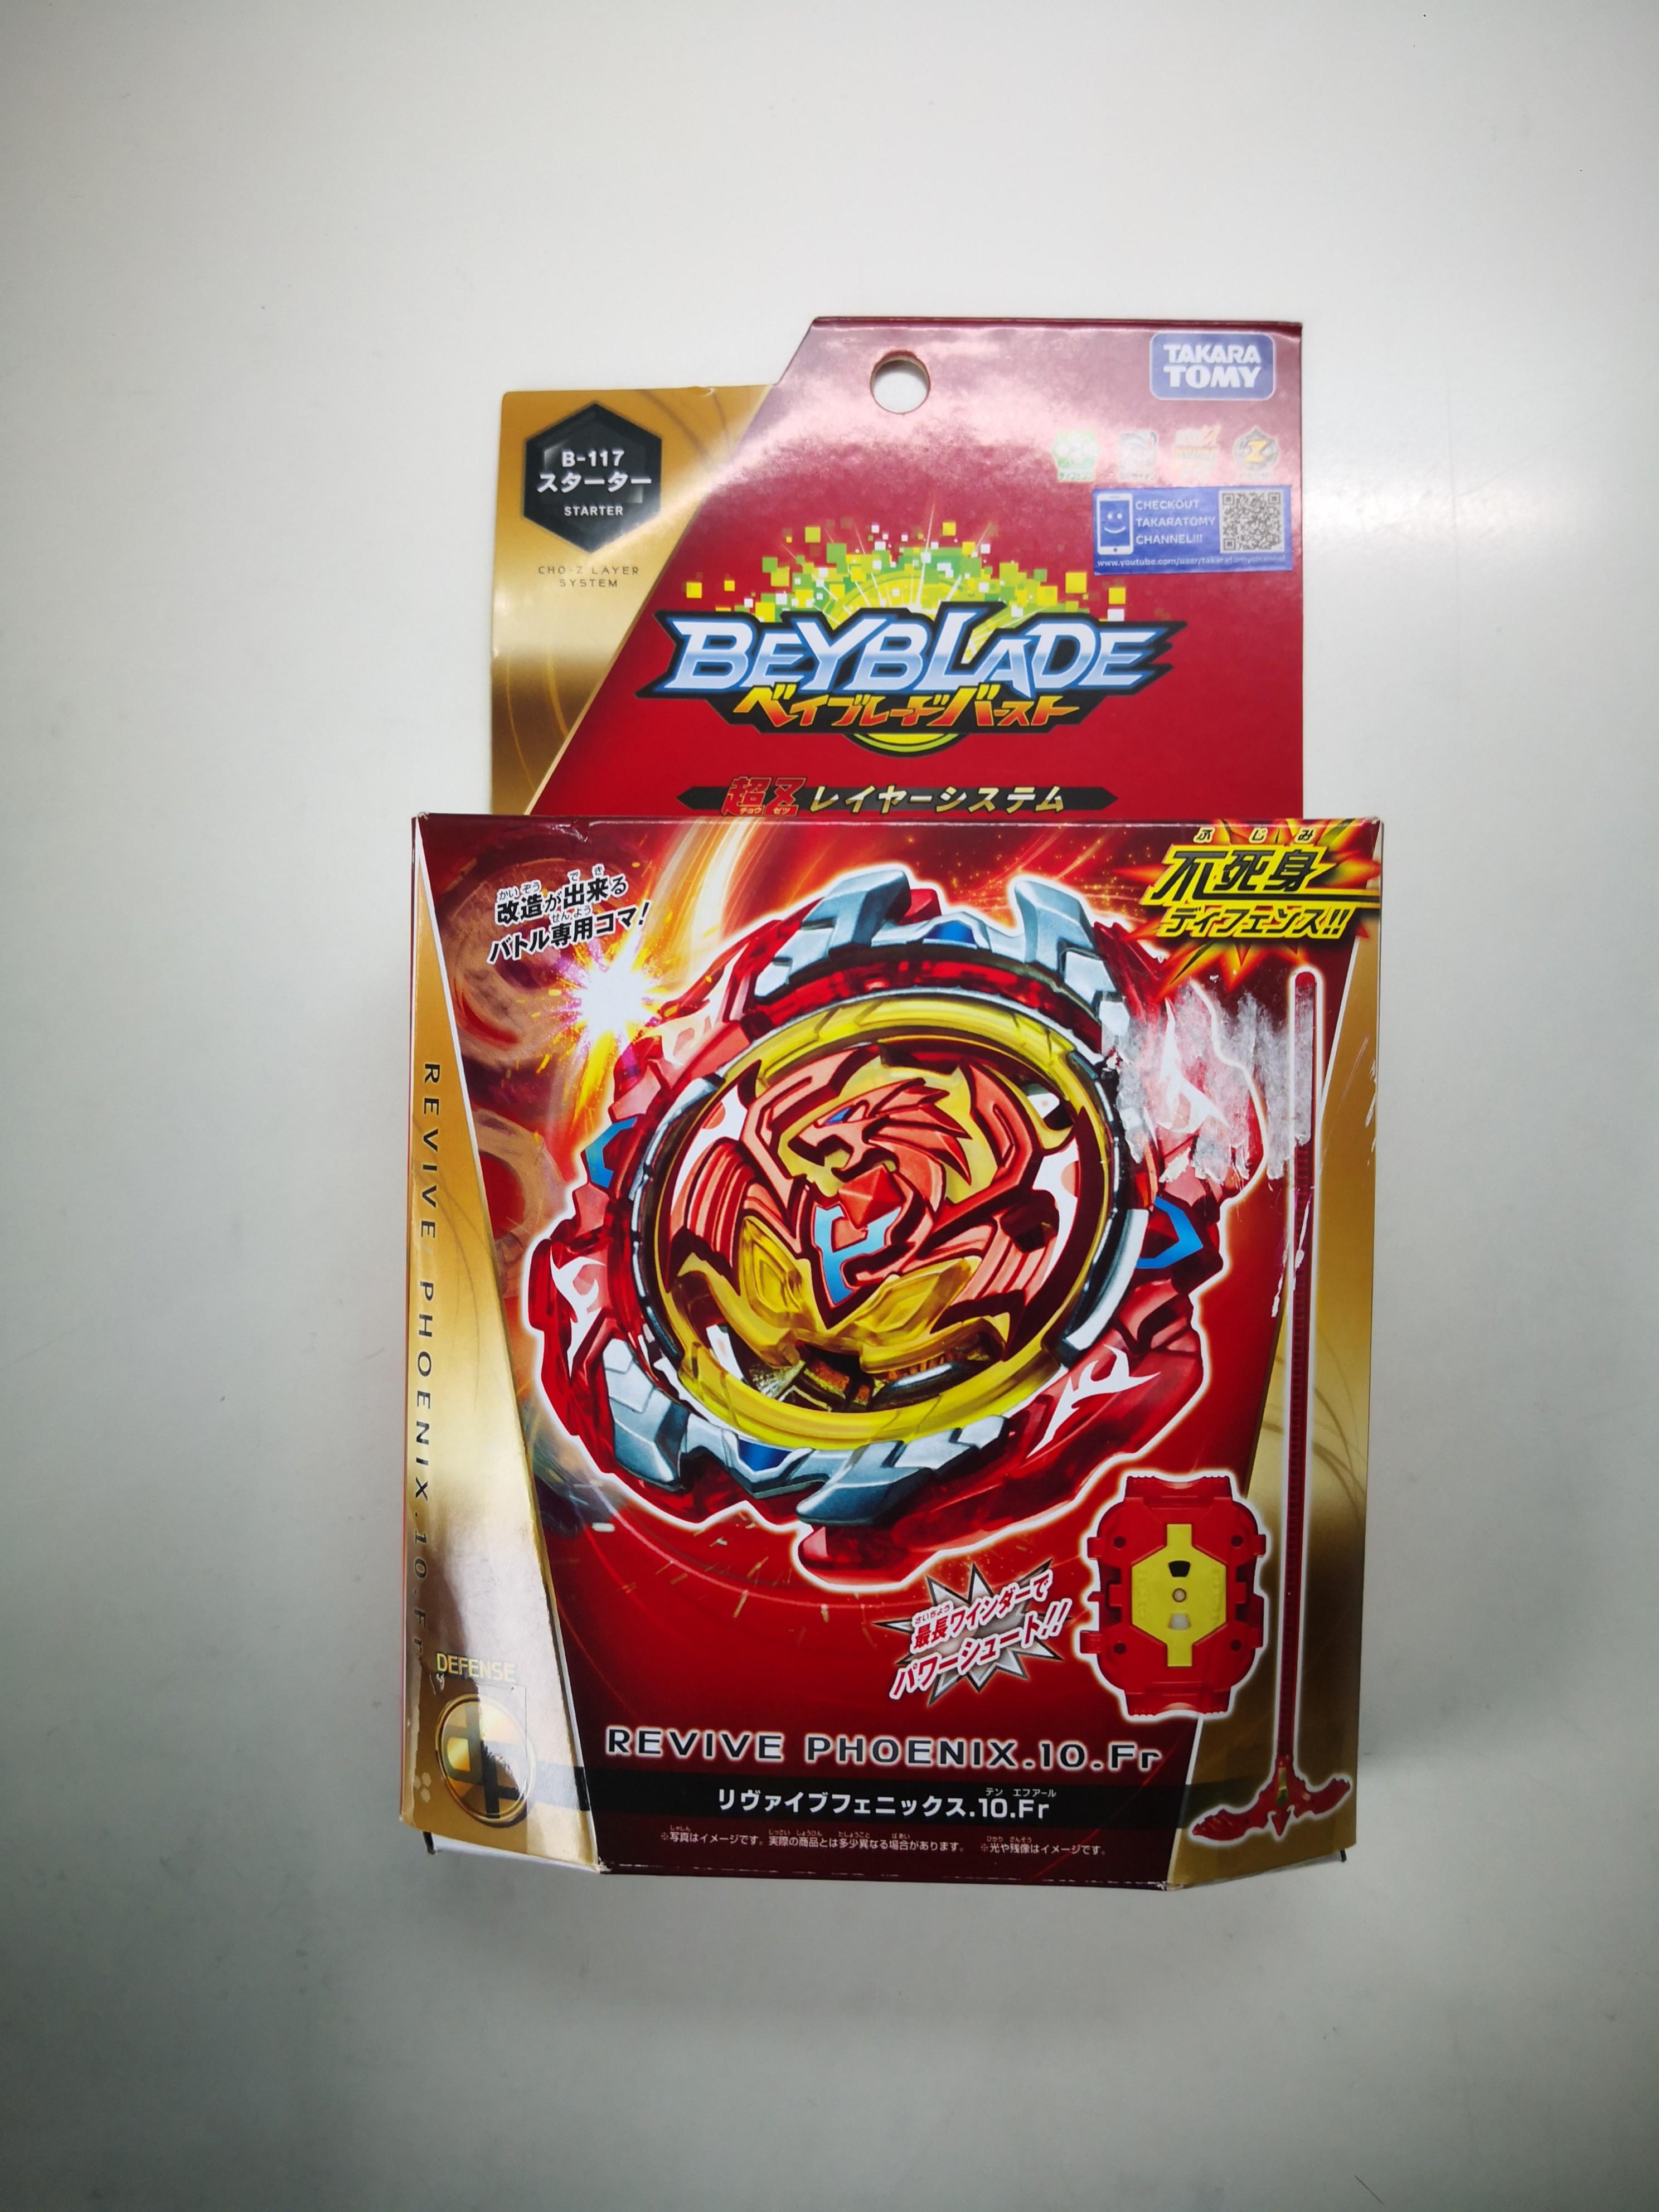 15 Left Takara Tomy Beyblade Burst Cho Z Layer System B 117 Starter Revive Phoenix 10 Fr With Phoenix Launcher Toys Games Others On Carousell